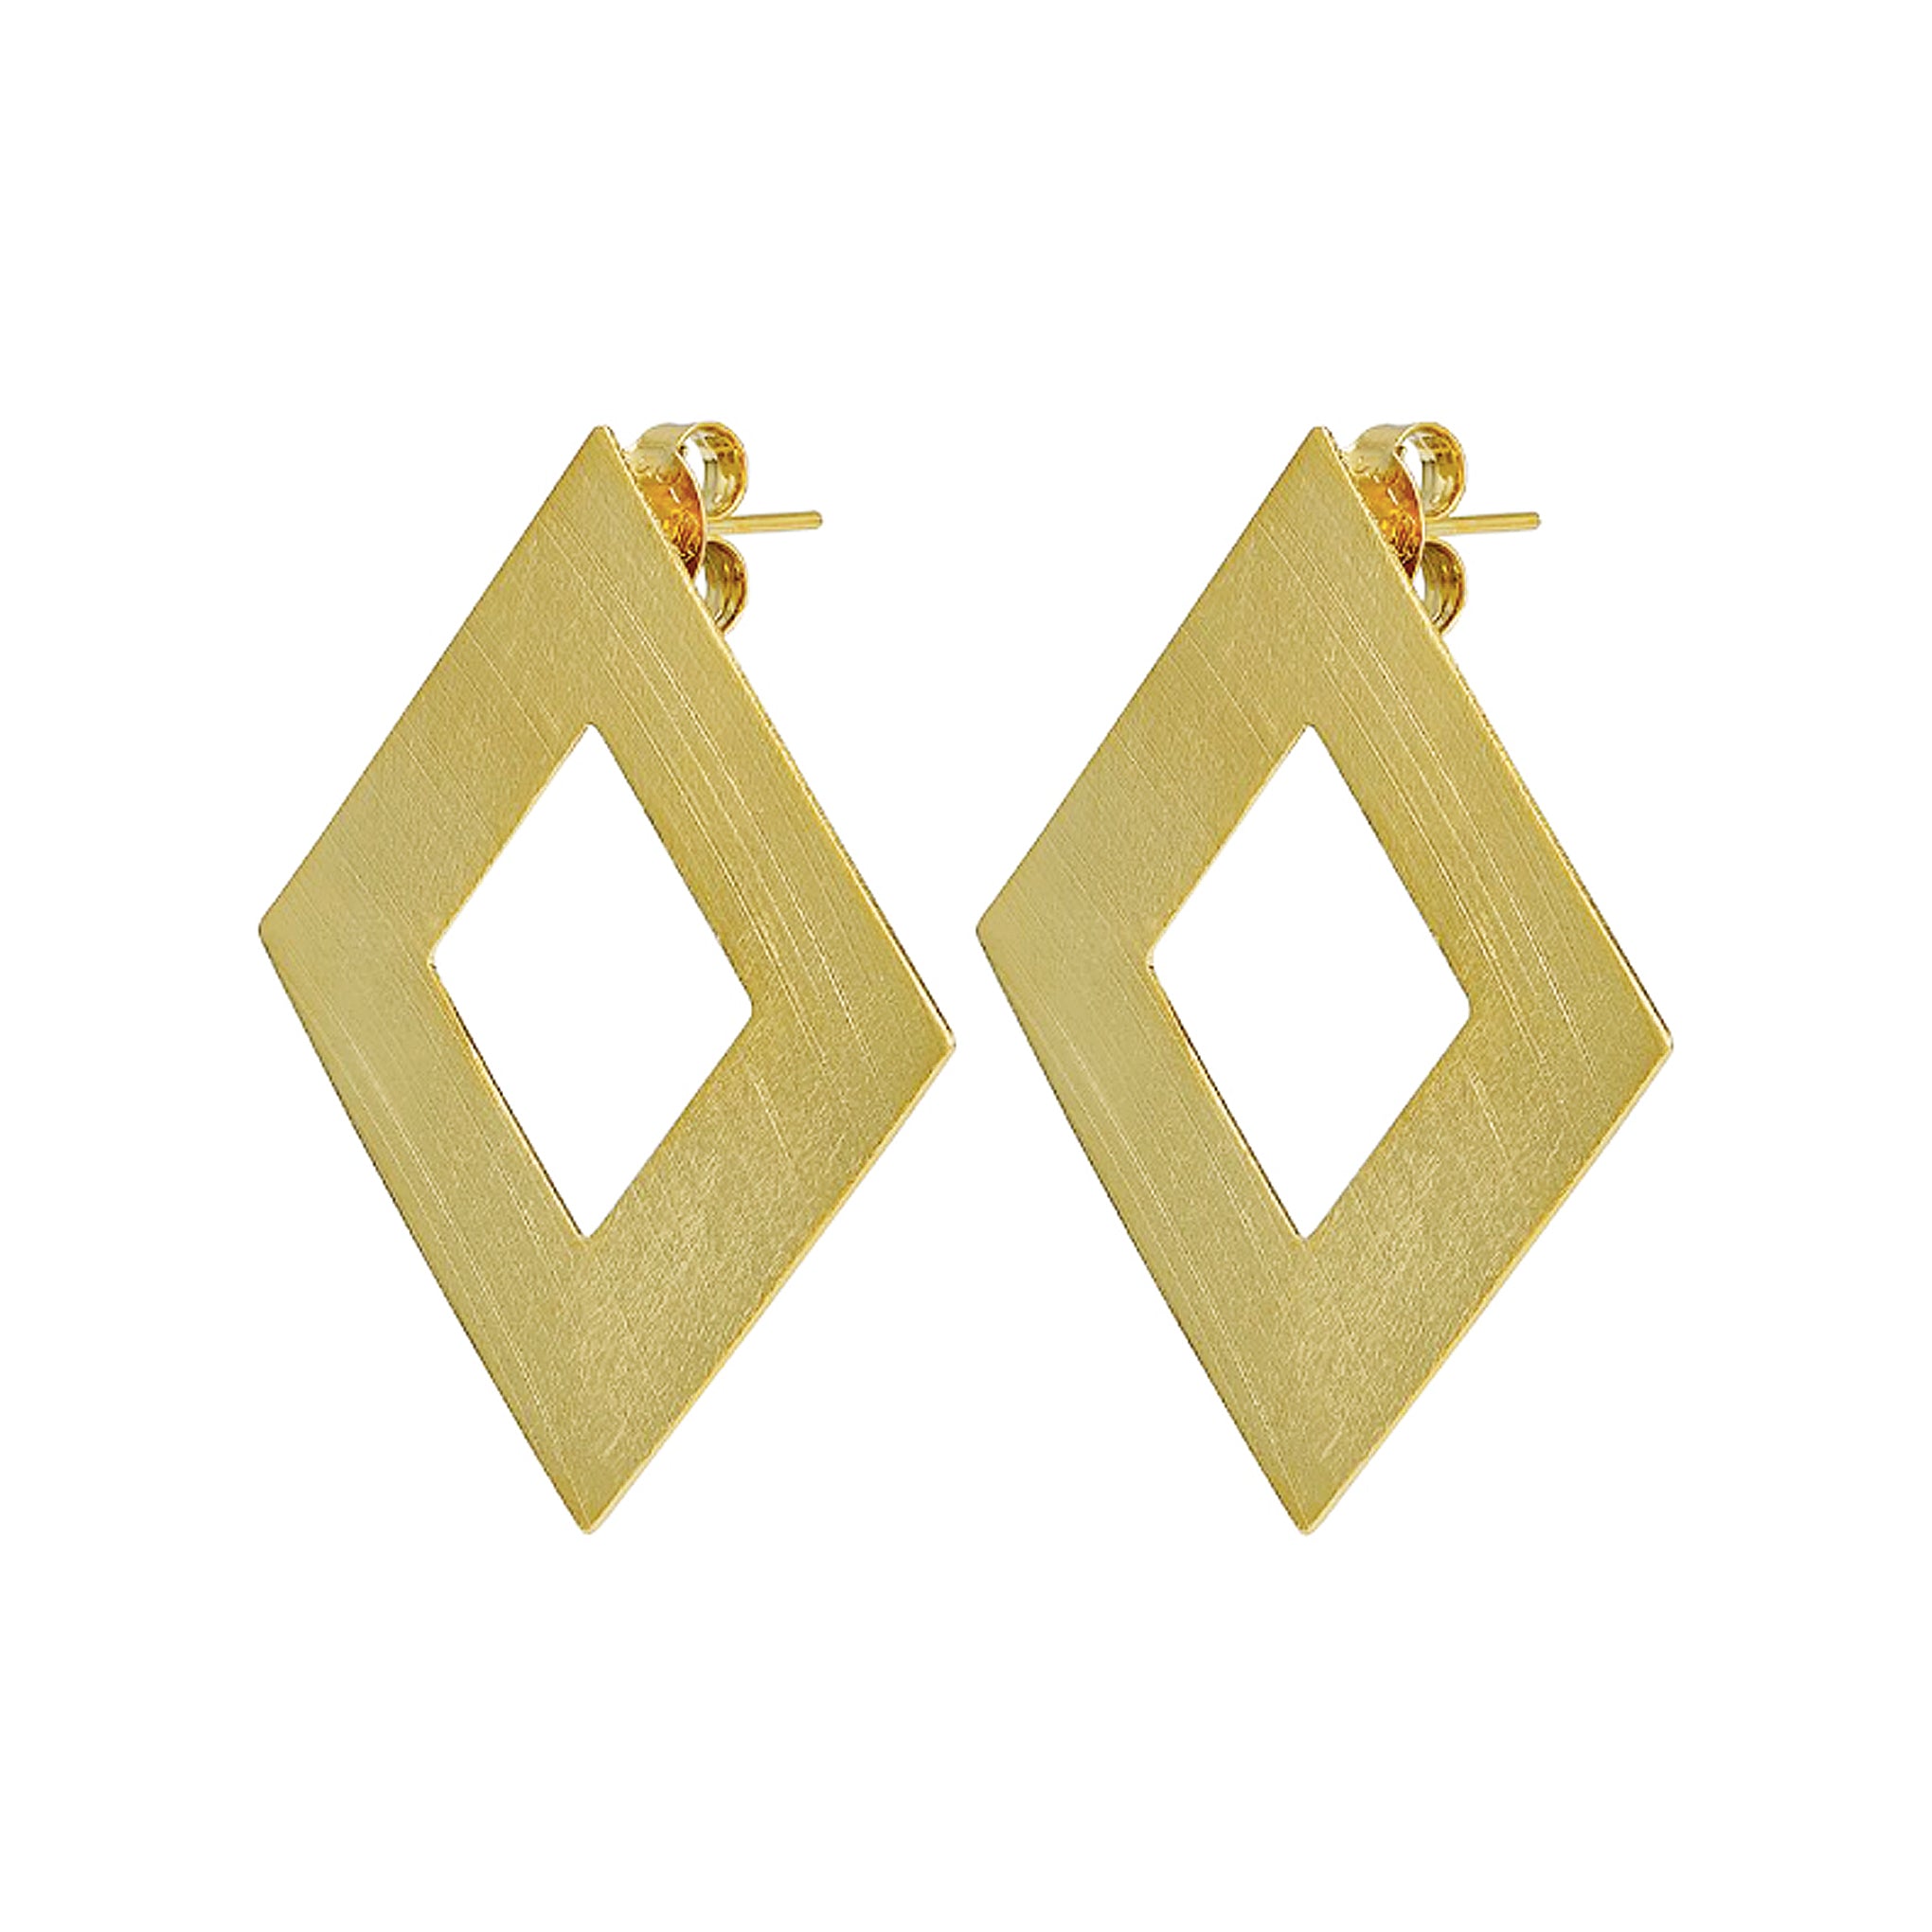 Sheila Fajl Seline Square Stud Earrings in Brushed Gold Plated